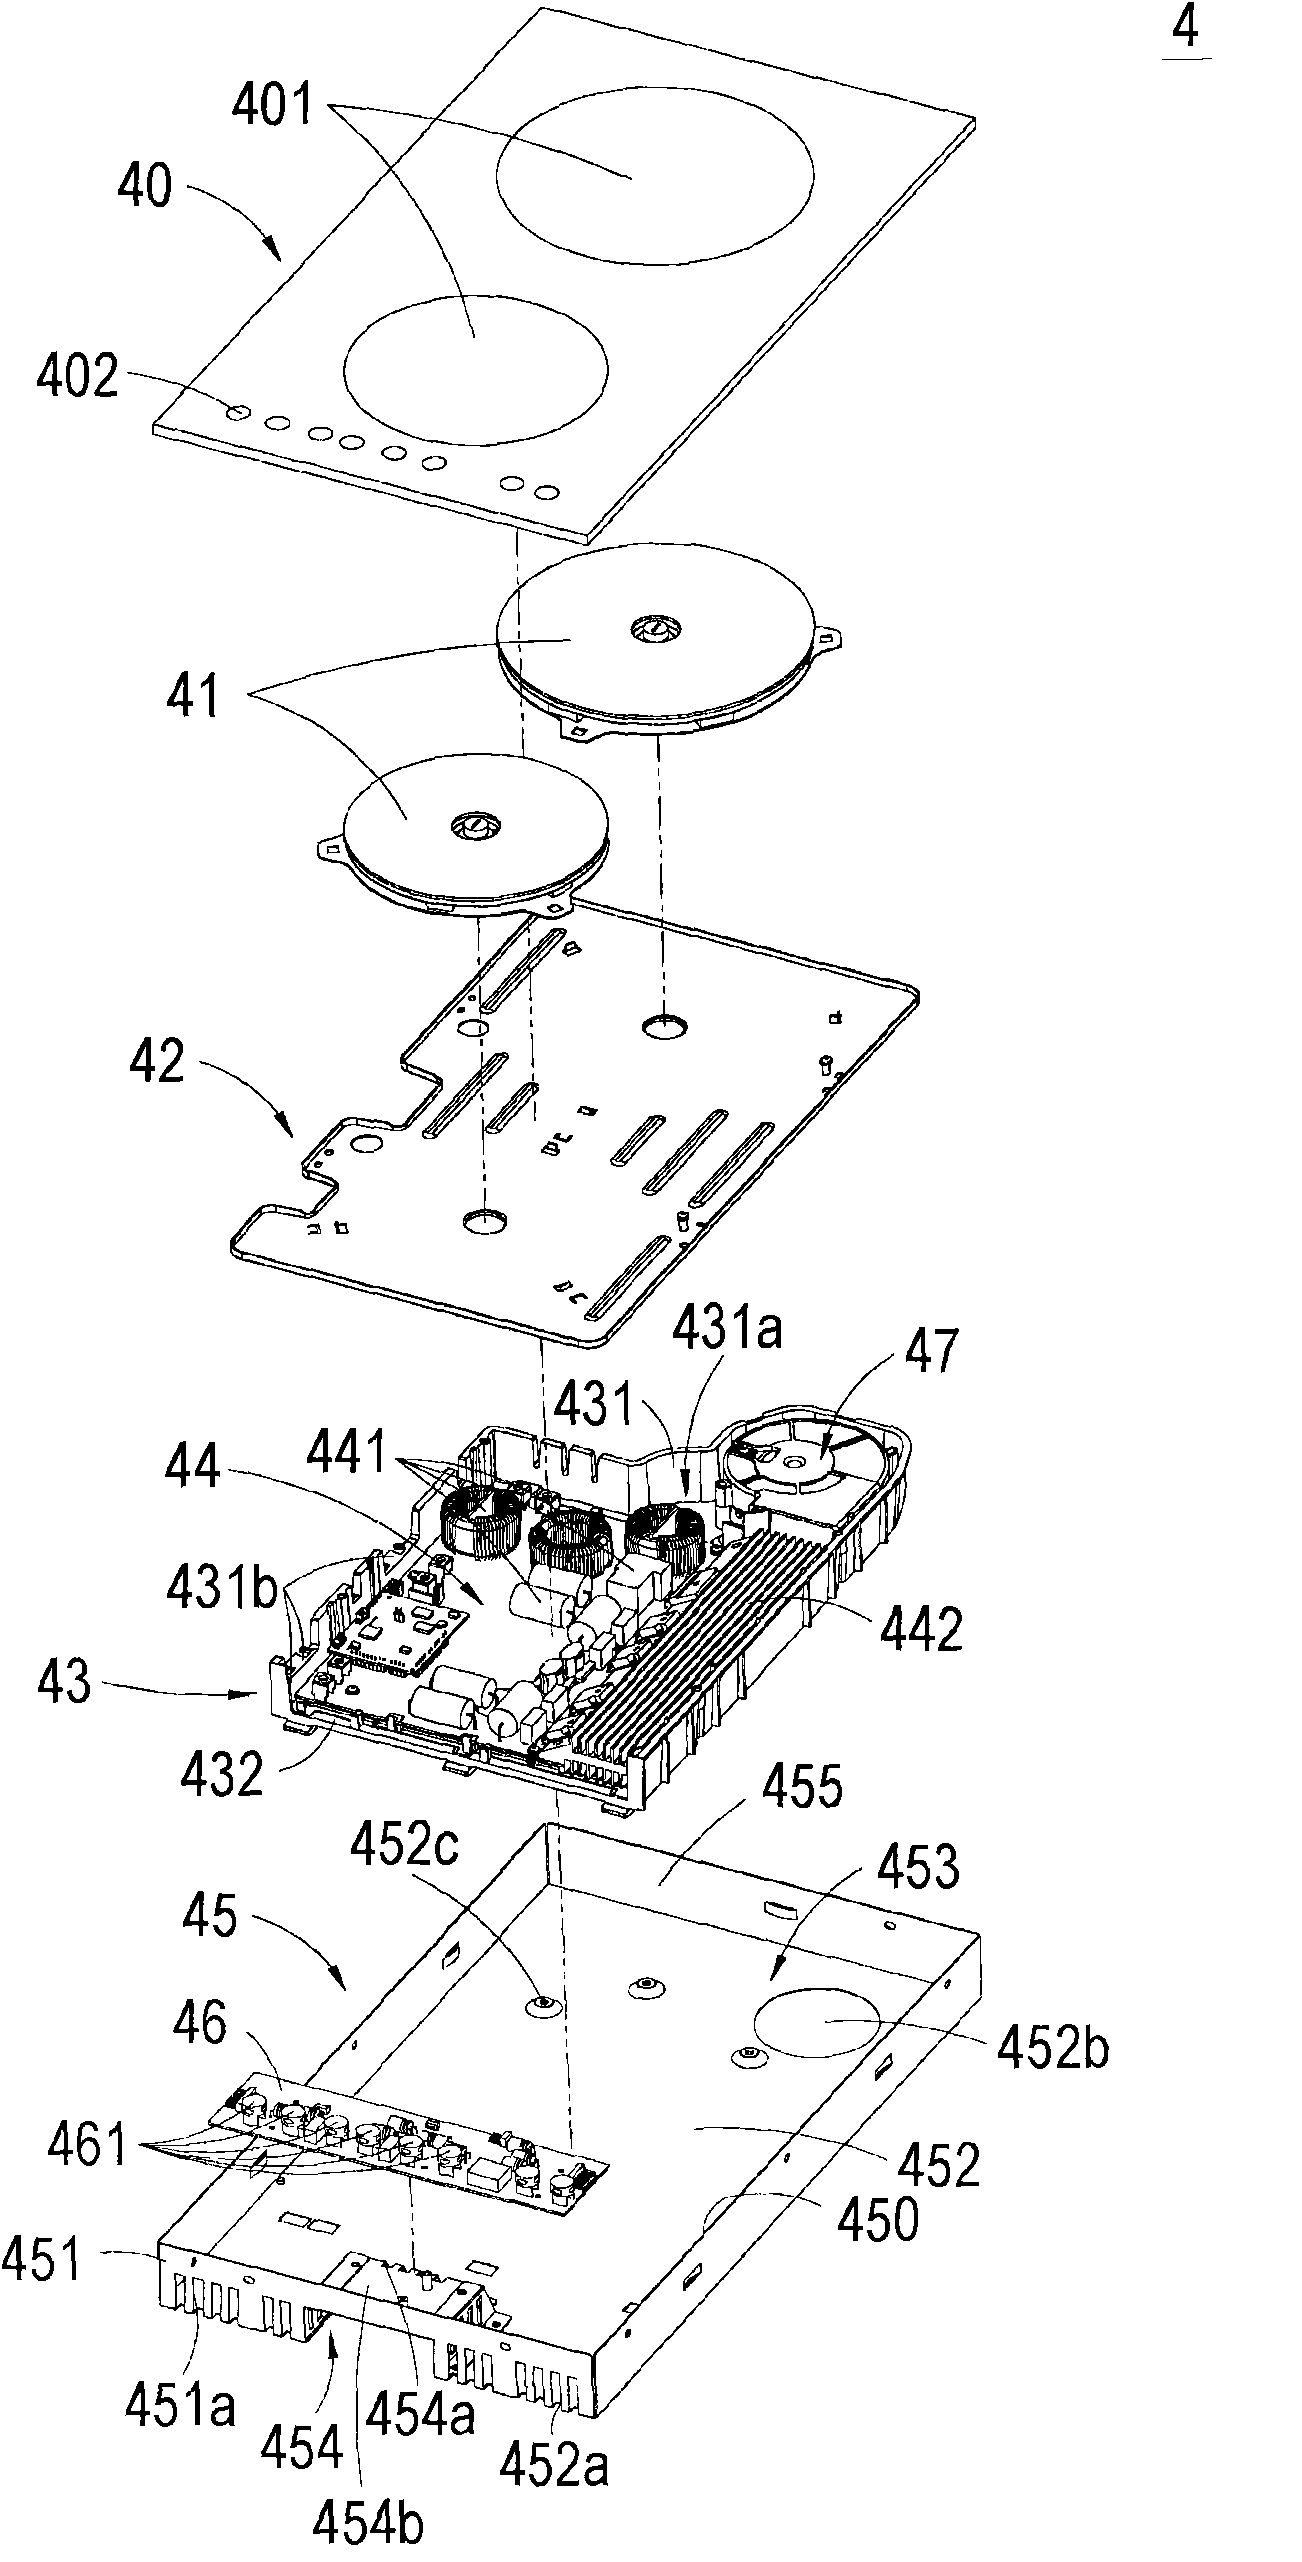 Electrical installation and radiating circulation system using same